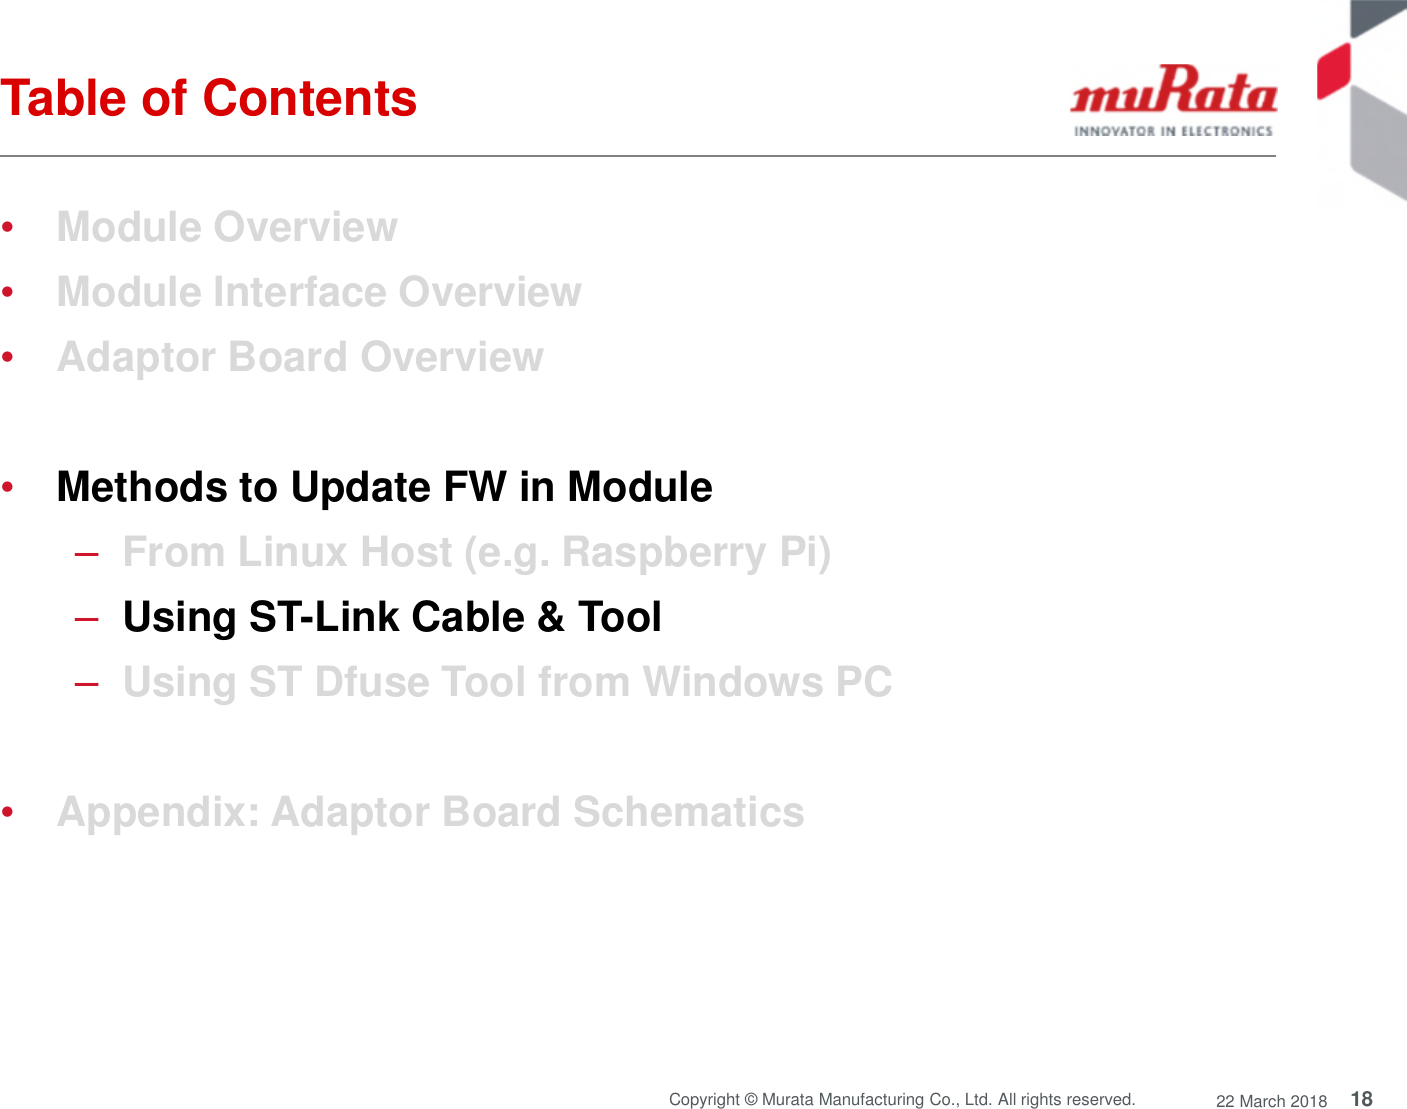 18Copyright © Murata Manufacturing Co., Ltd. All rights reserved. 22 March 2018Table of Contents•Module Overview•Module Interface Overview•Adaptor Board Overview•Methods to Update FW in Module–From Linux Host (e.g. Raspberry Pi)–Using ST-Link Cable &amp; Tool–Using ST Dfuse Tool from Windows PC•Appendix: Adaptor Board Schematics